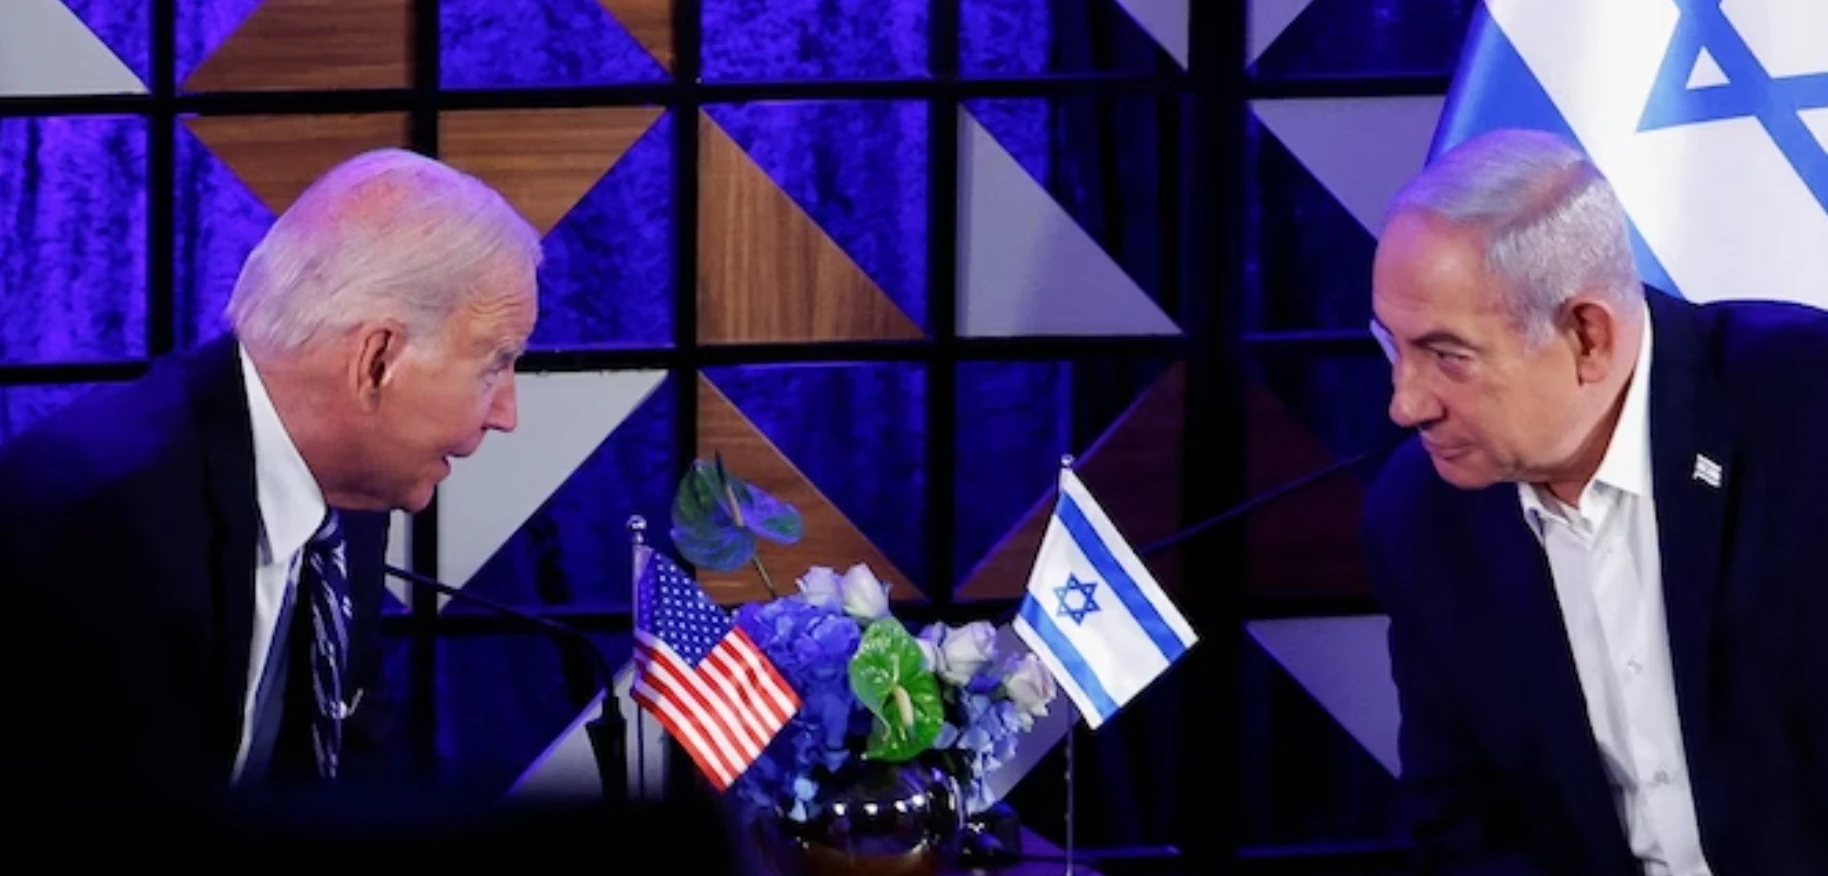 More US assistance is on the way to Israel, Biden tells Netanyahu